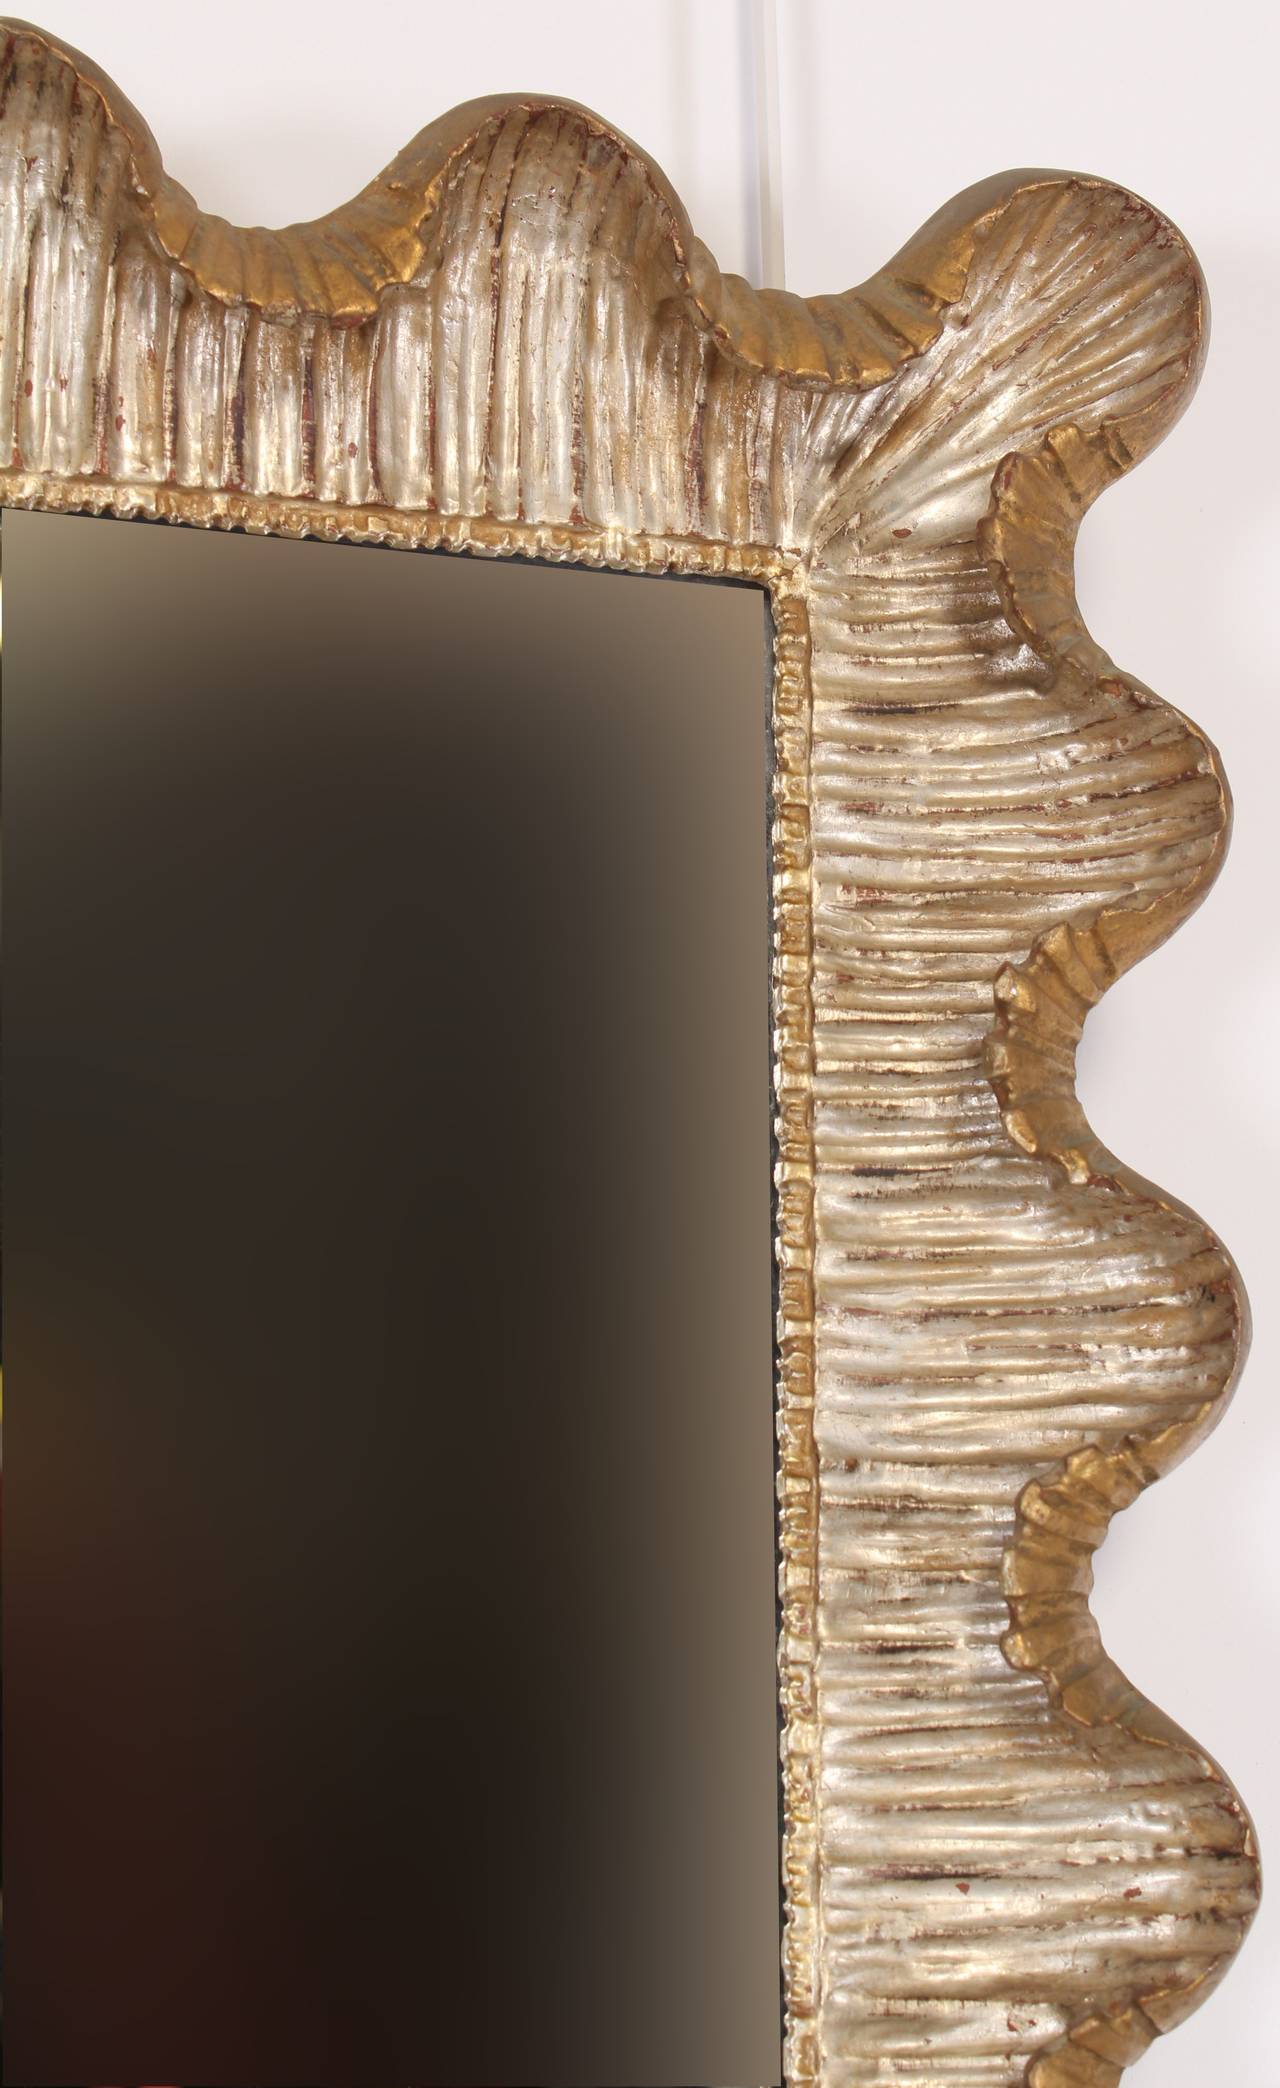 Wood carved, hand applied silver gilt with gold gilt background over gessoed frame, crafted in Italy during the 1950s. Has mounts that facilitate hanging the mirror either vertical or horizontal.